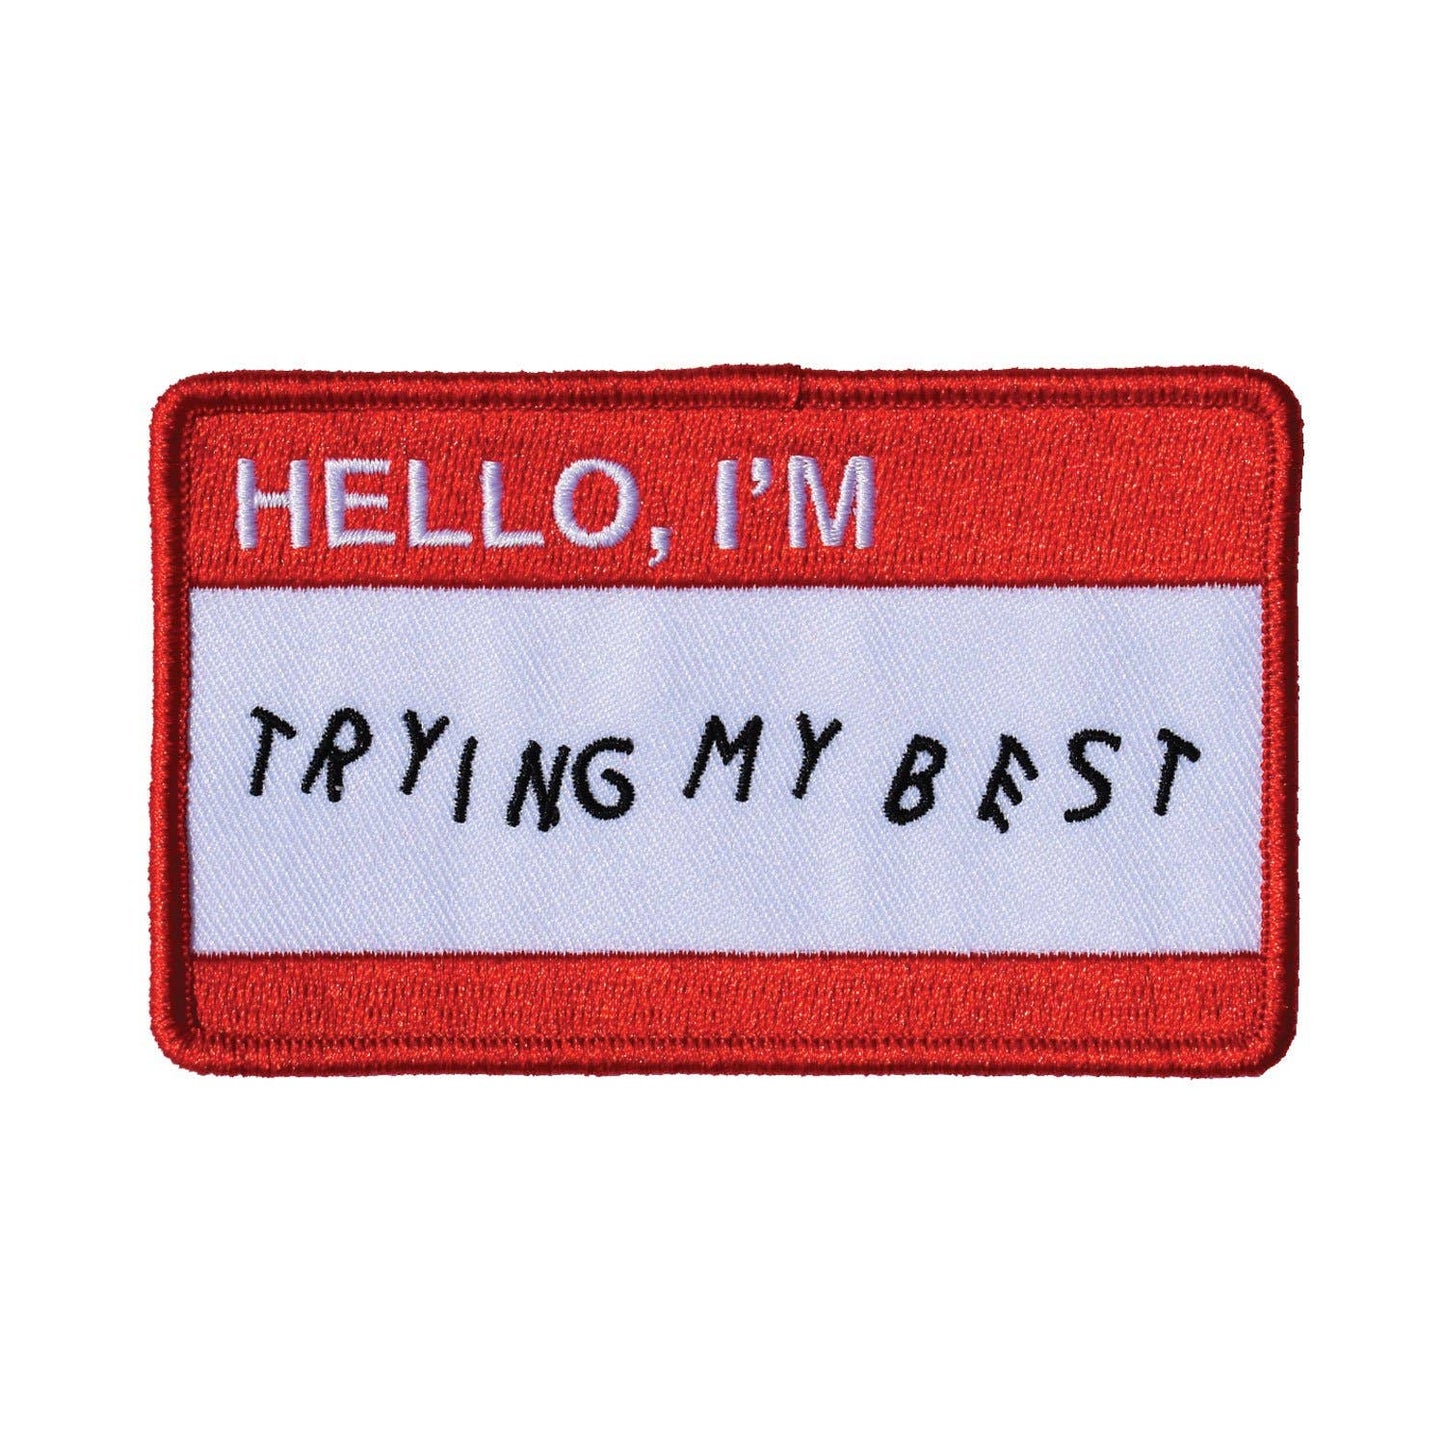 Trying My Best | Embroidered Patch